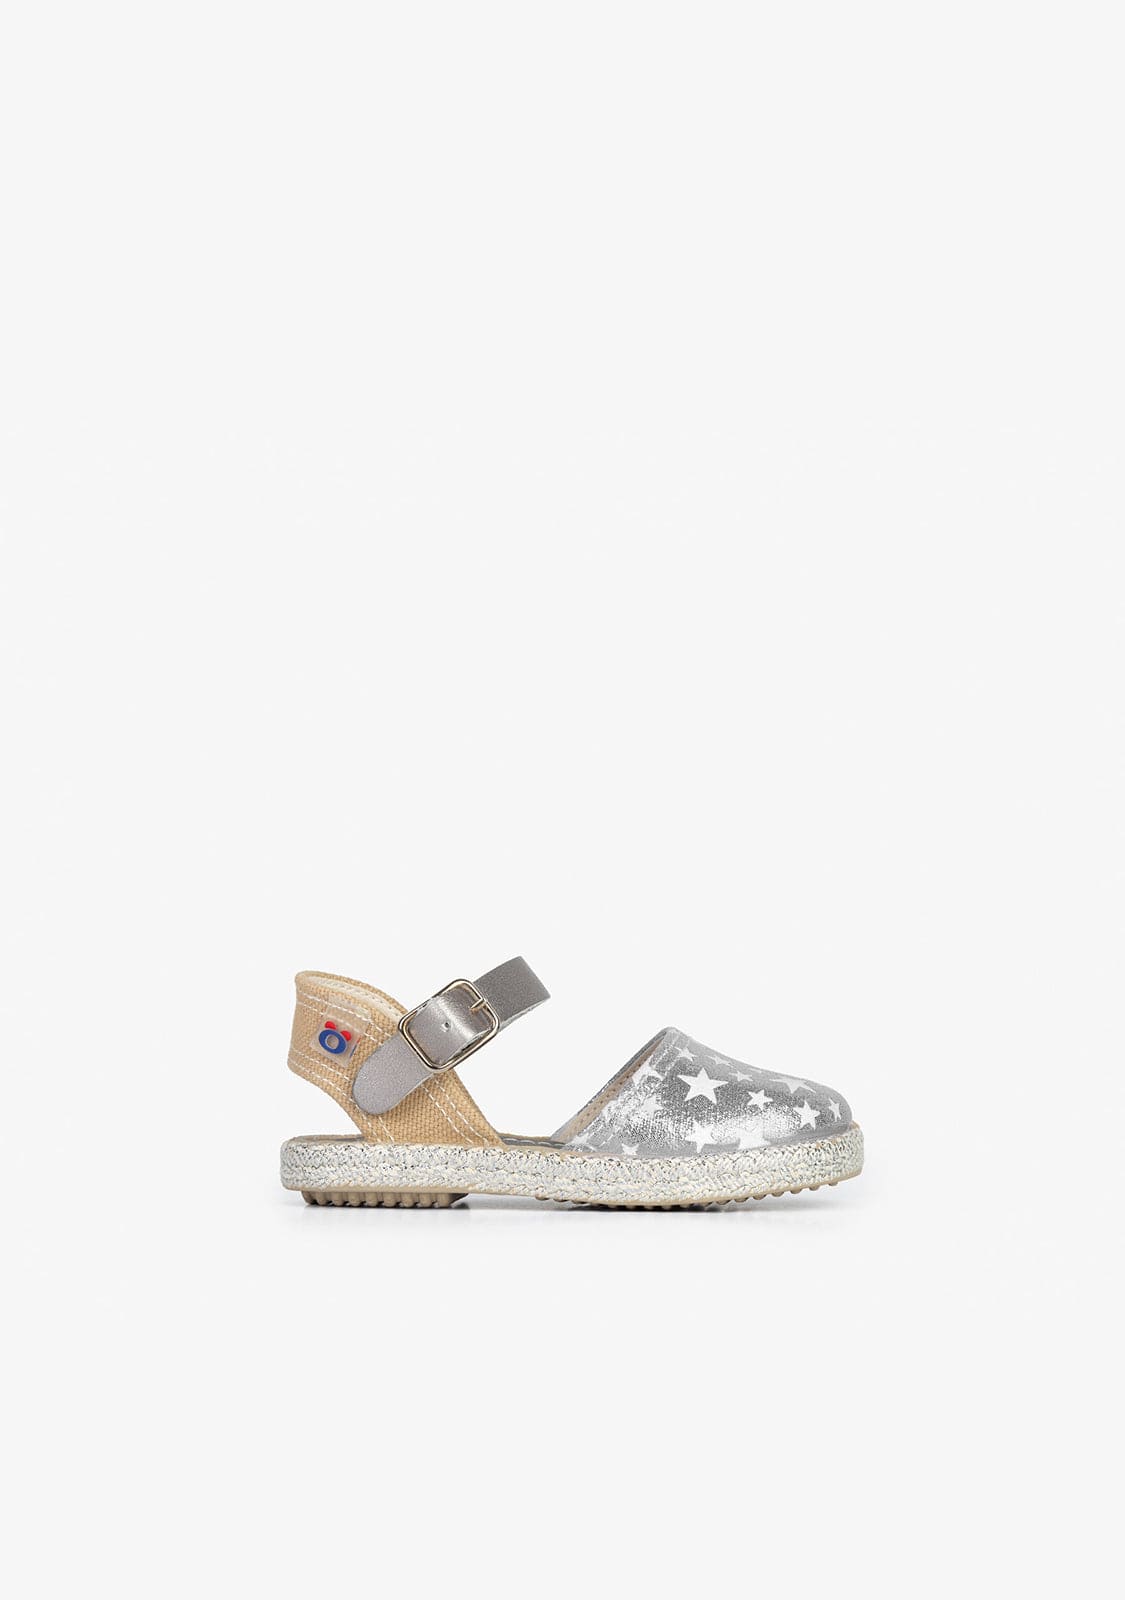 OSITO Shoes Baby's Star Silver Glow Espadrilles